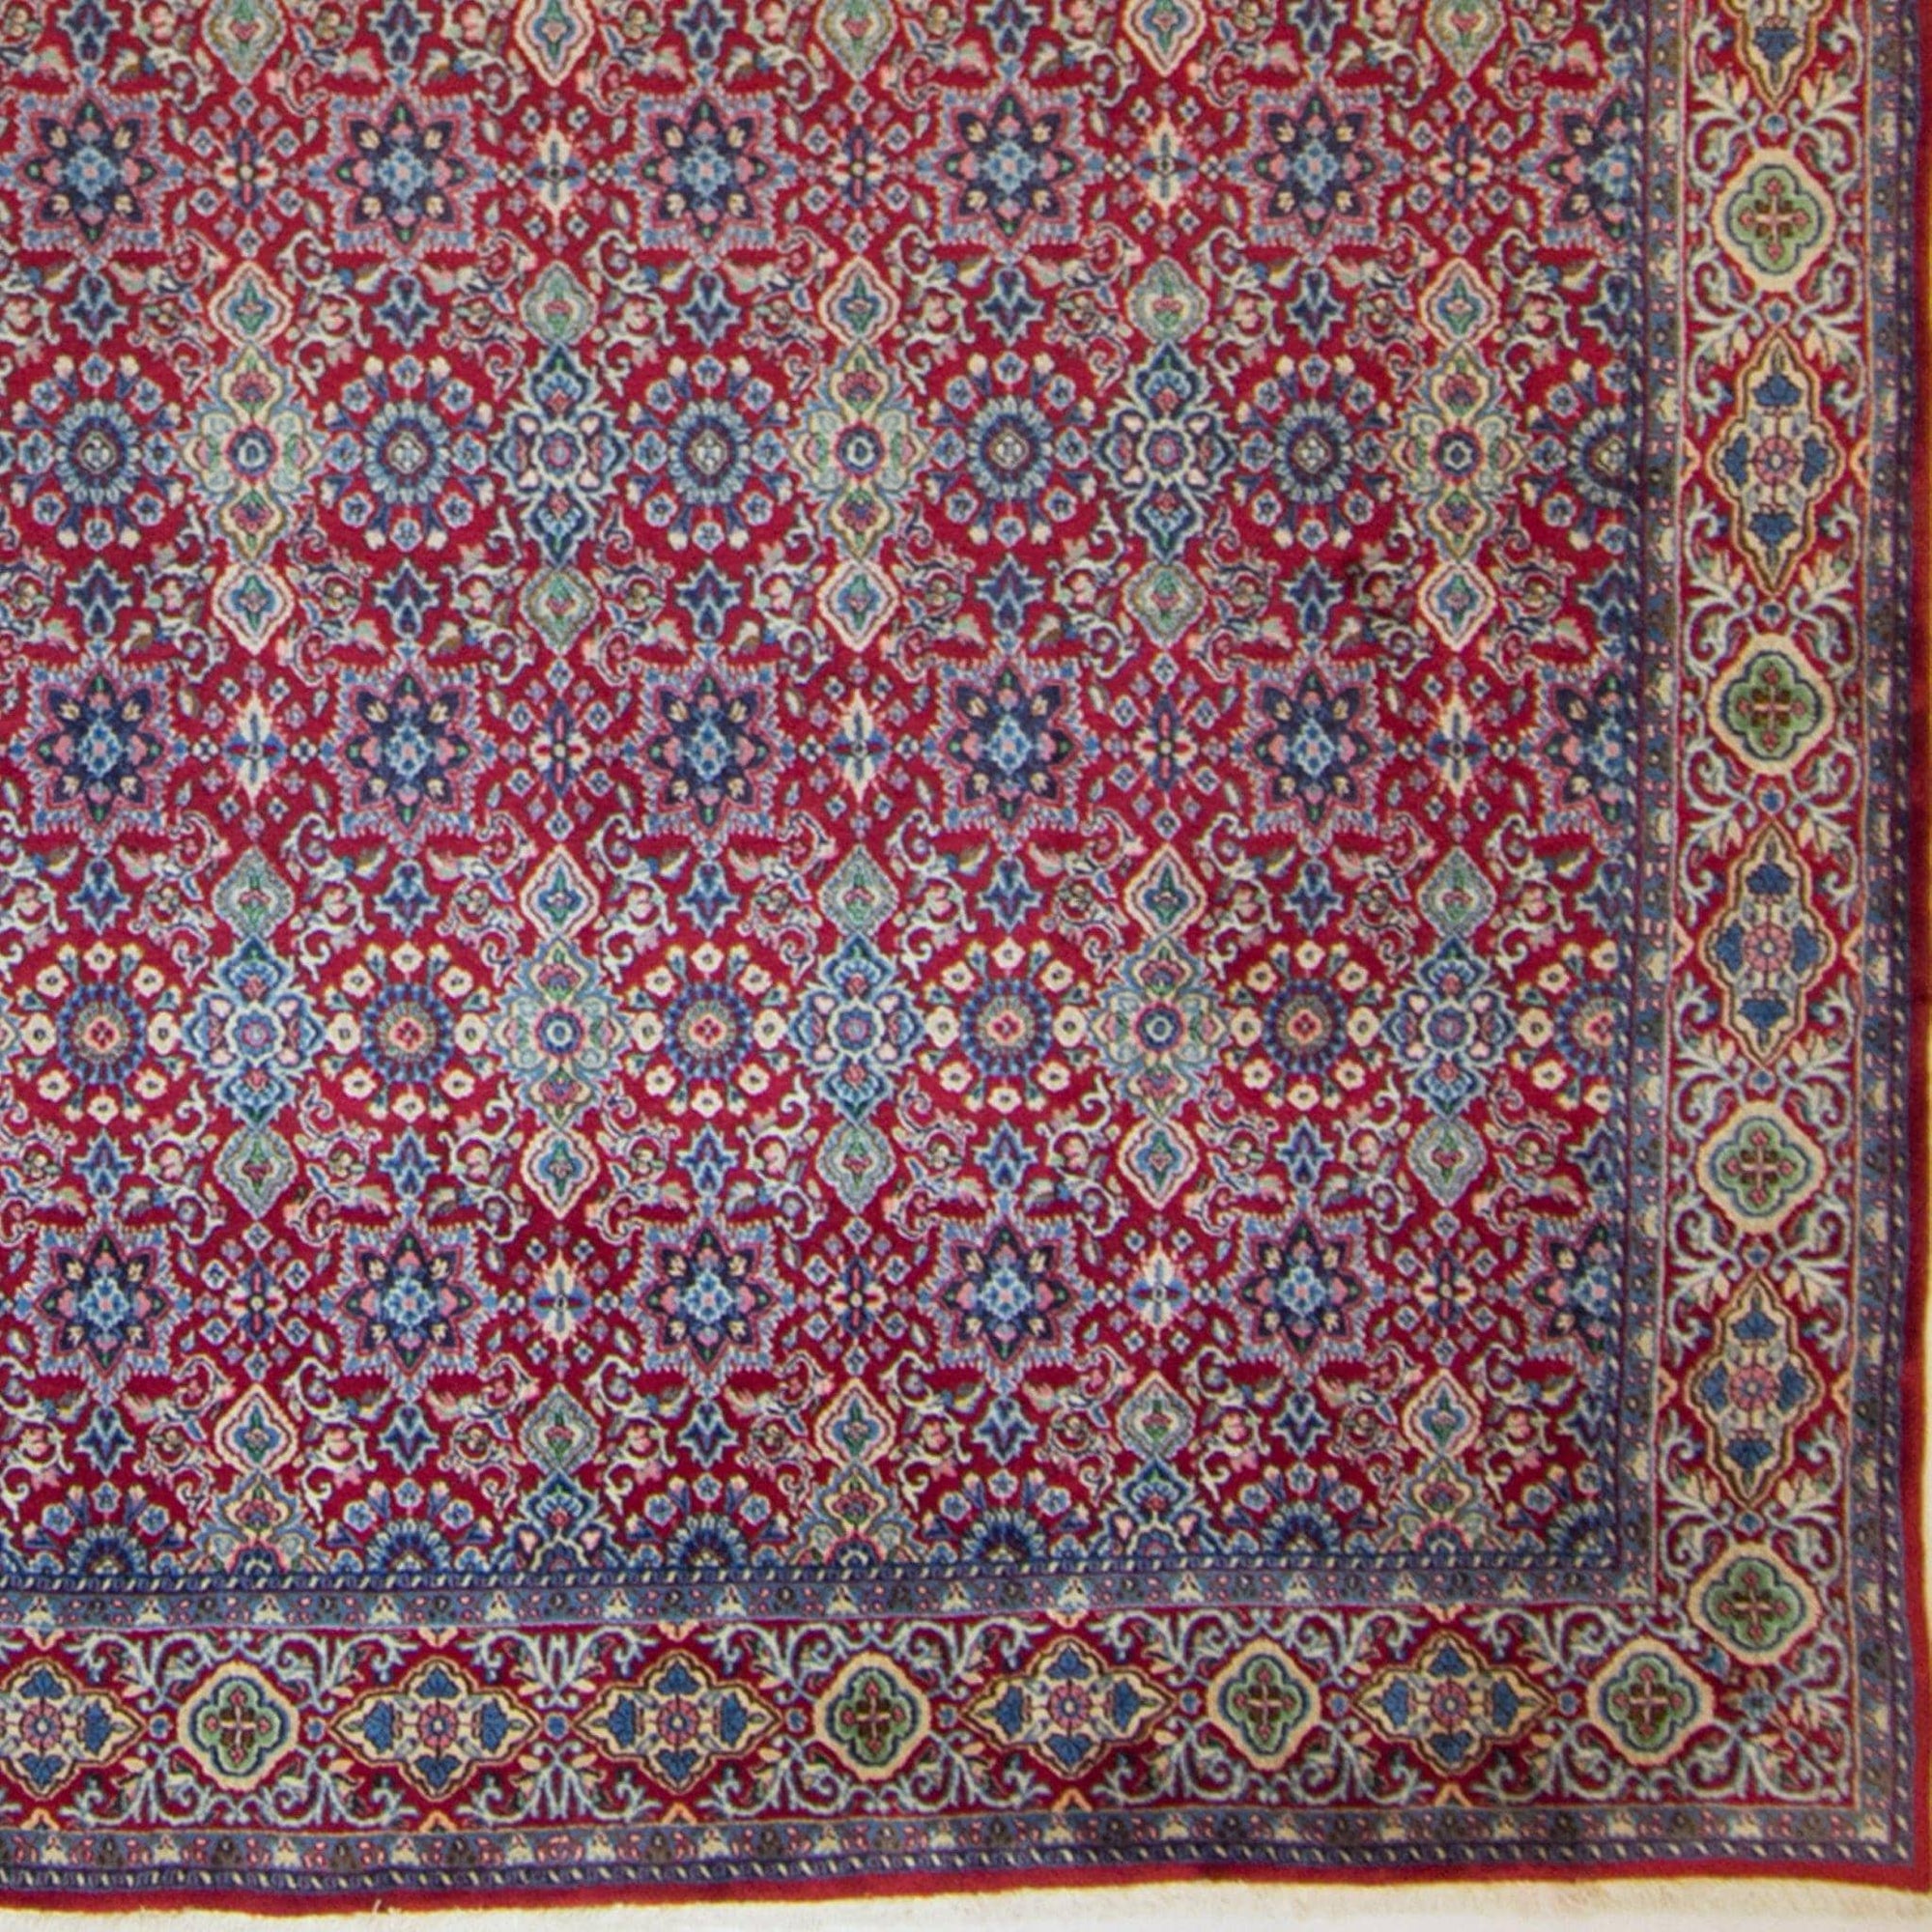 Fine Hand-knotted Wool Maud Persian Rug 254cm x 367cm